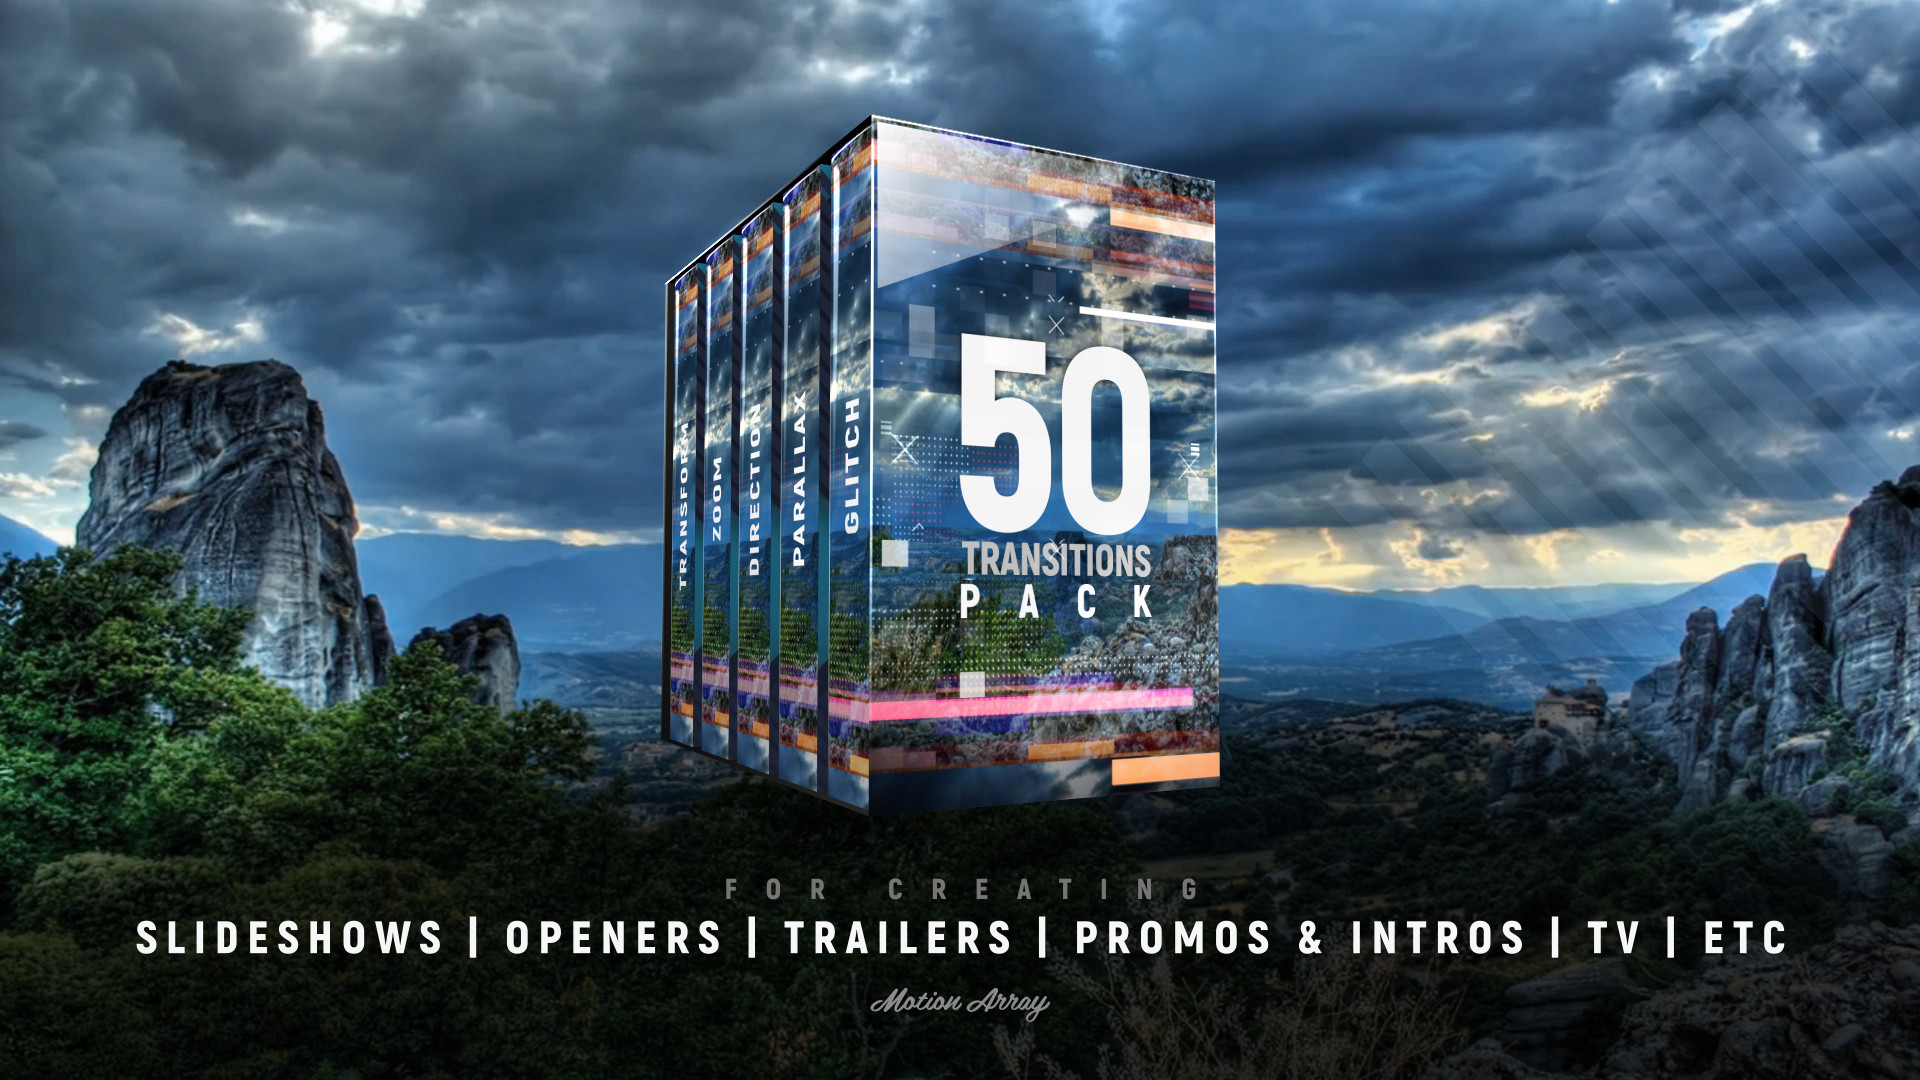 transition pack 3 filmimpact transition pack 3 license key